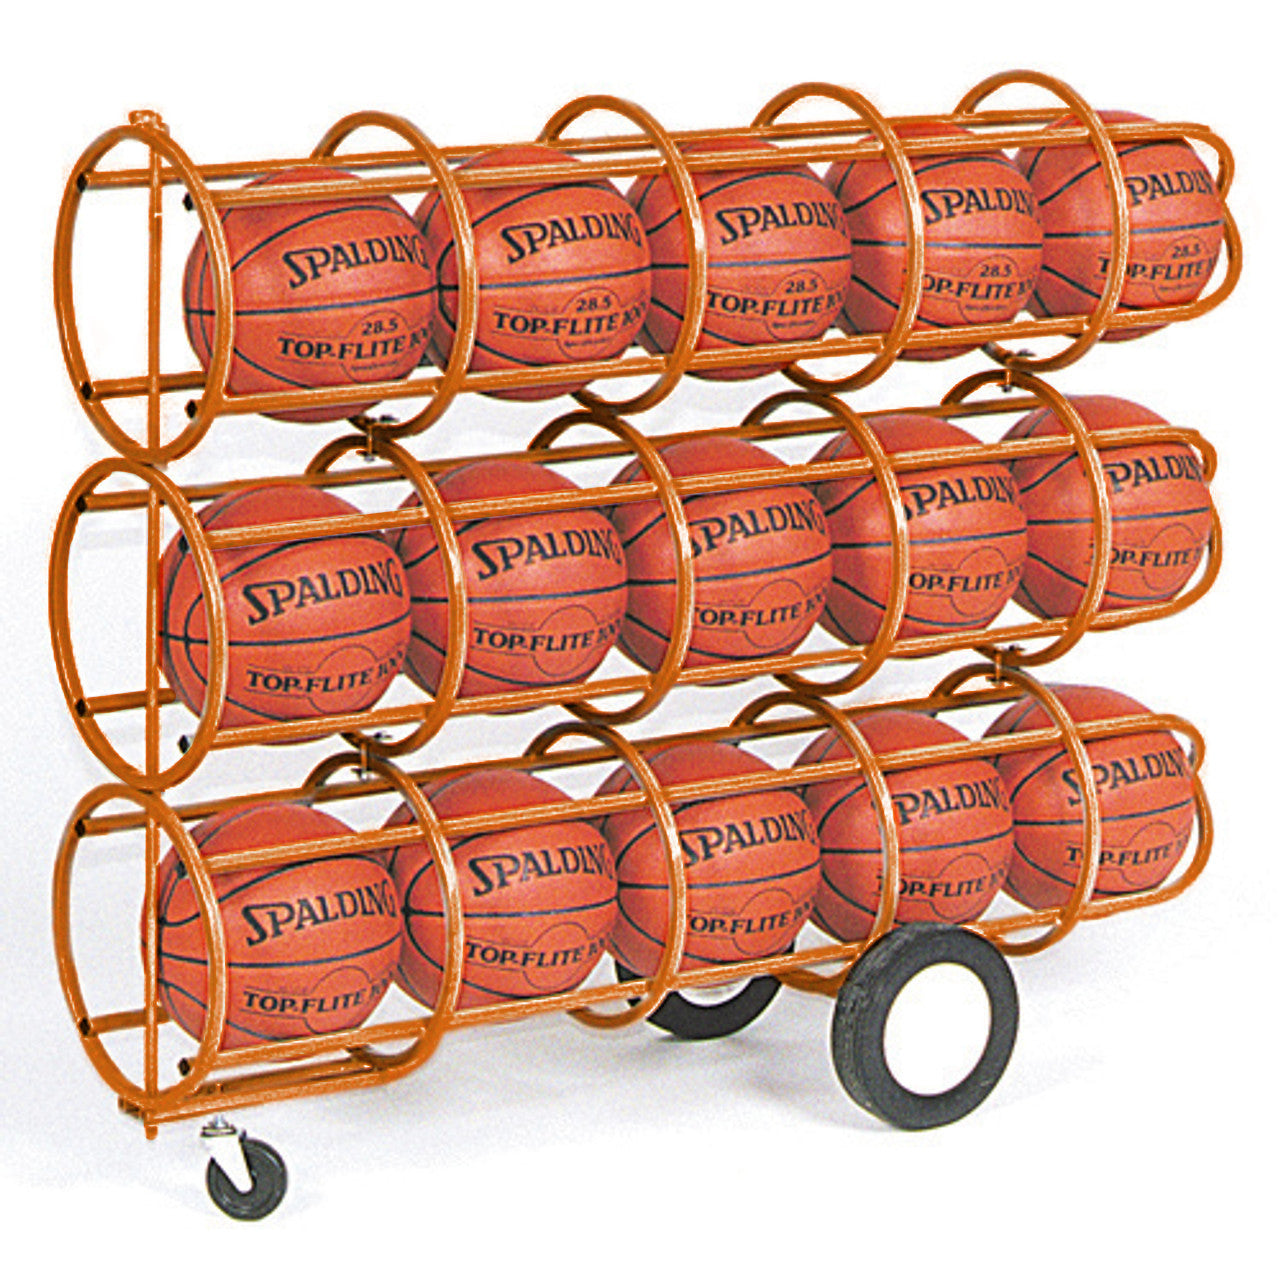 Reliable Football Stand Fall-resistant Smooth Rounded Basketball